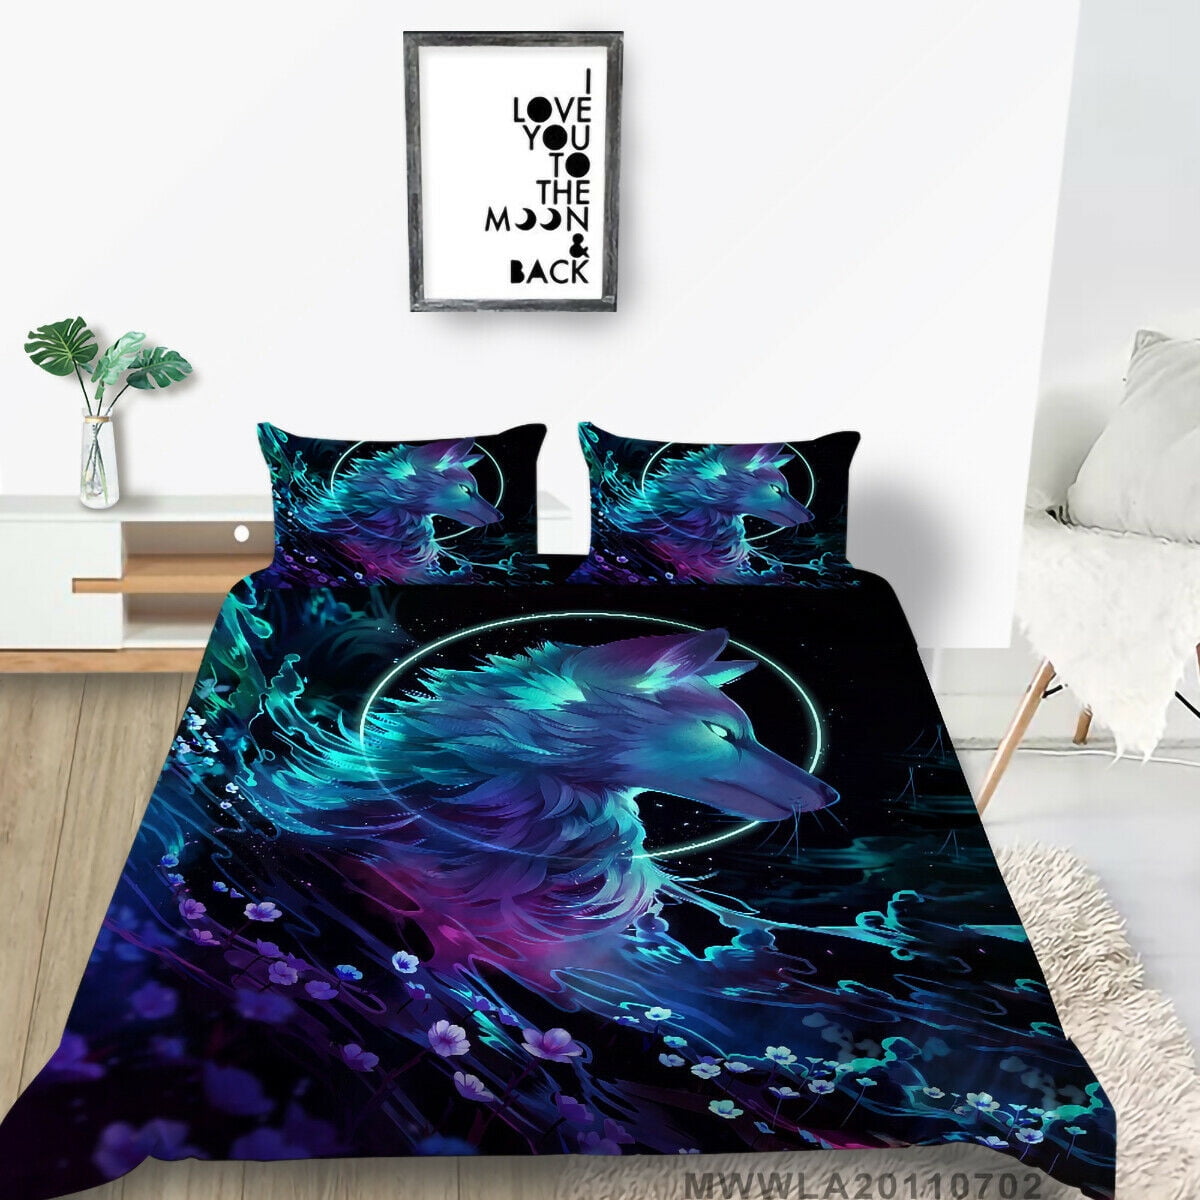 Scenes Printed Bedding Set 3D Duvet Quilt Cover Pillowcase Twin Or Queen Size 5 